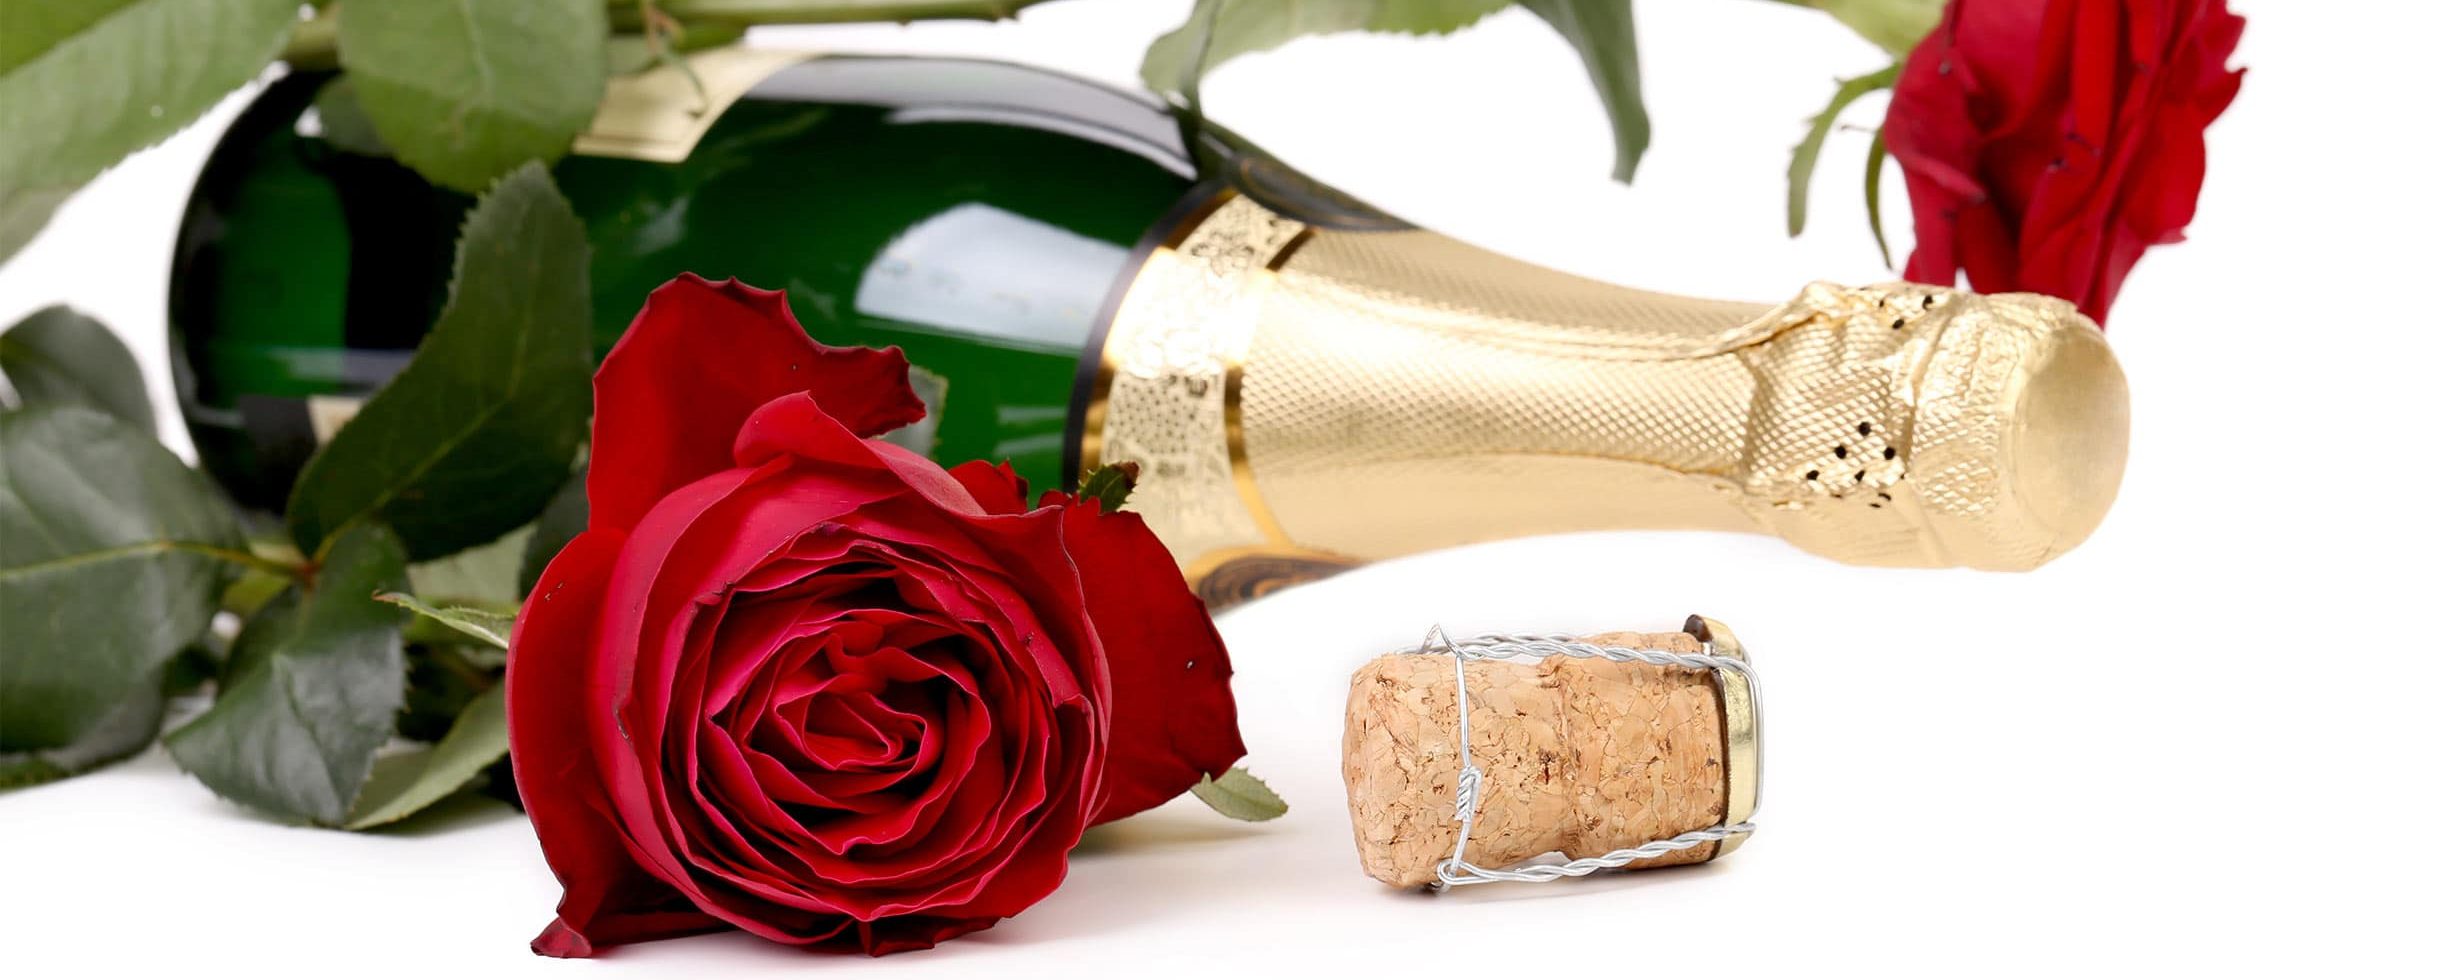 Bottle of Champagne with Red Rose